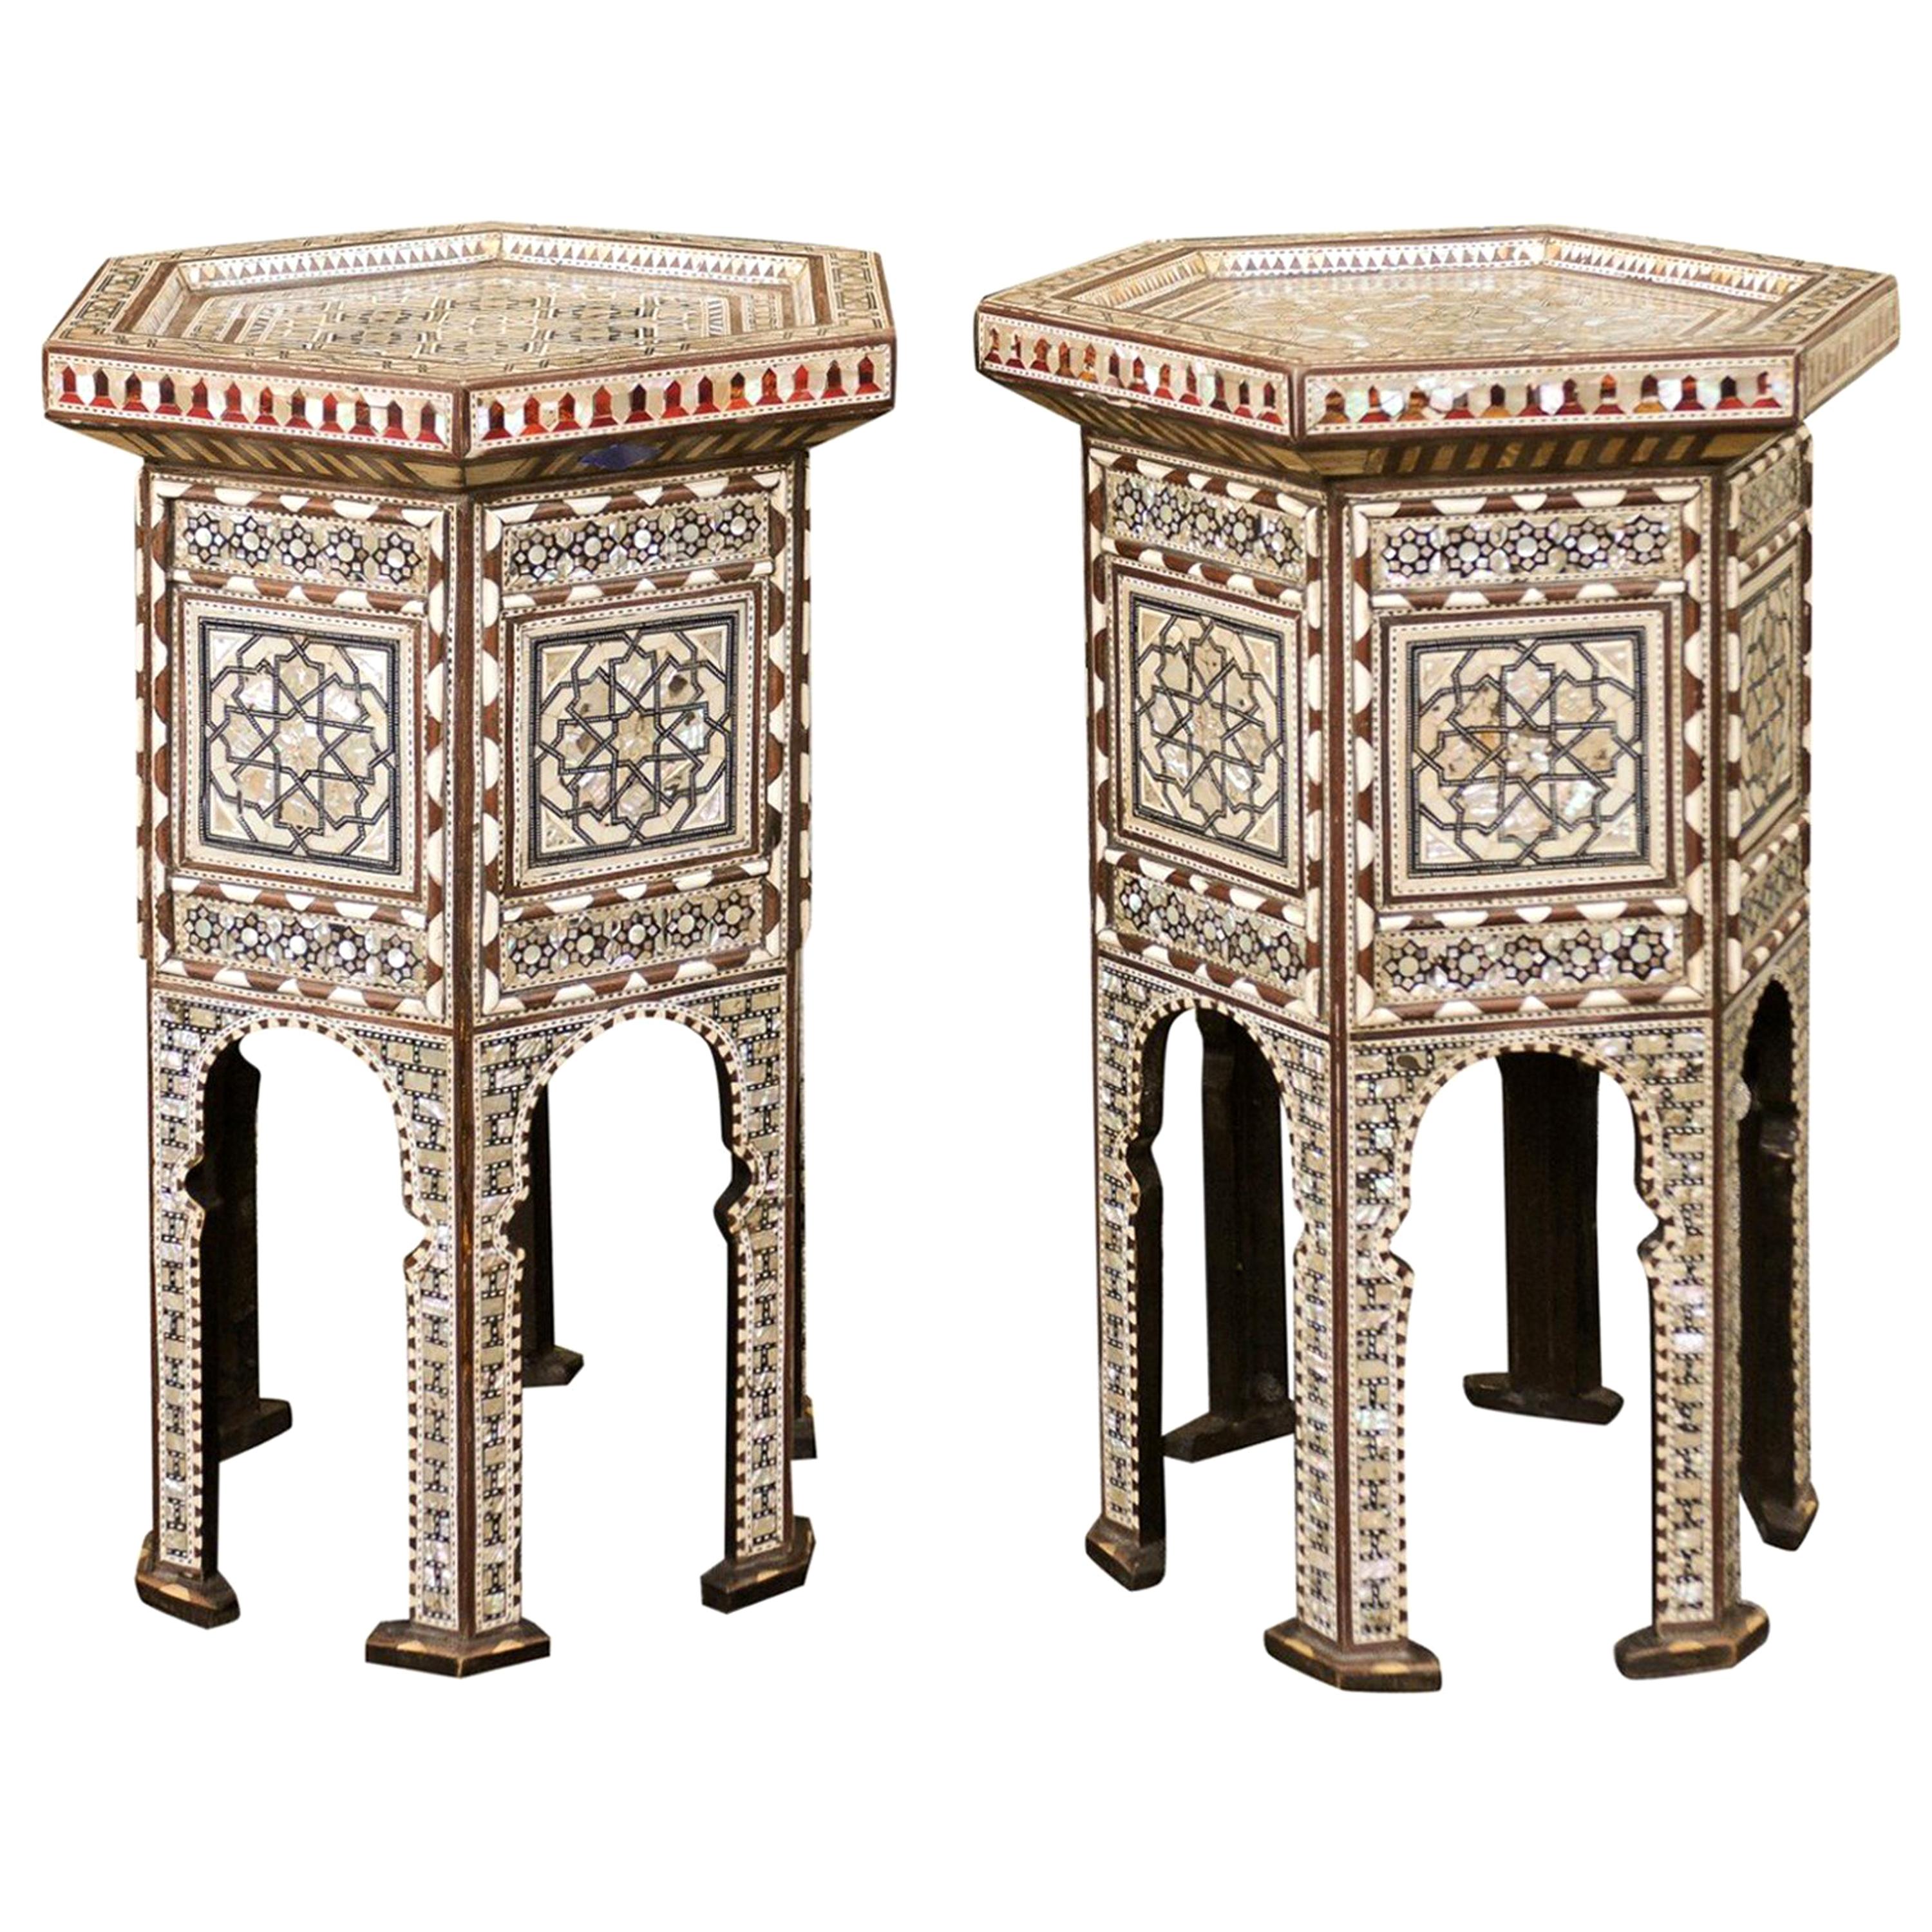 Moorish Style Syrian Hexagonal Side Tables with Mother of Pearl and Bone Inlay